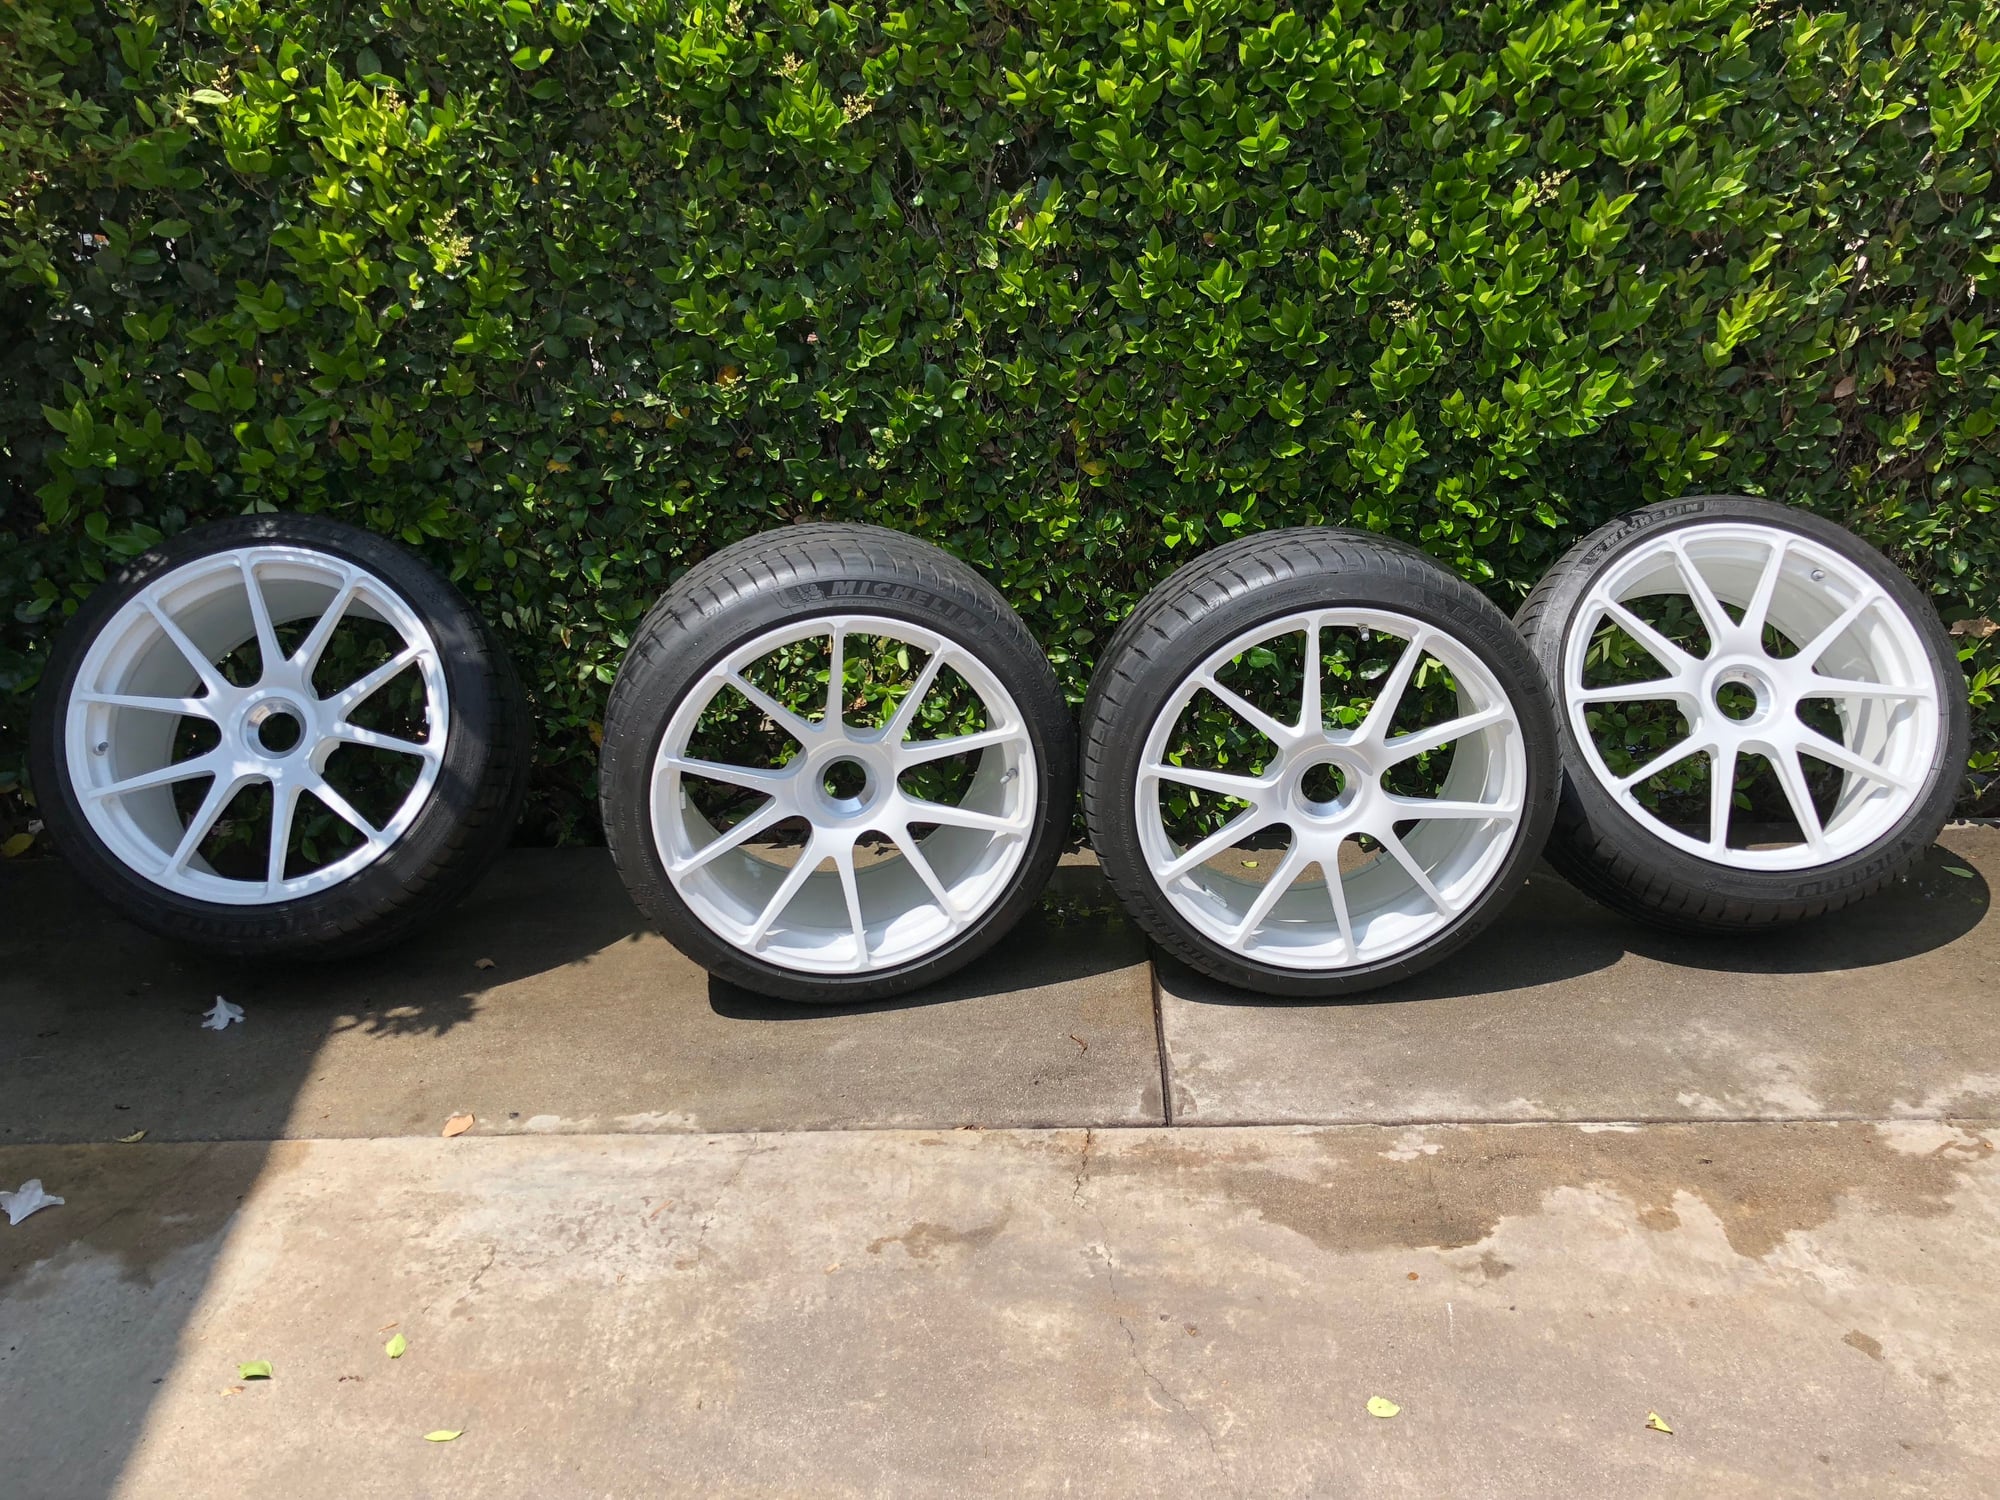 Wheels and Tires/Axles - Forgeline 991 Turbo S Center Locks for sale - Used - 2016 to 2019 Porsche GT3 - 2015 to 2019 Porsche 911 - Los Angeles, CA 91401, United States